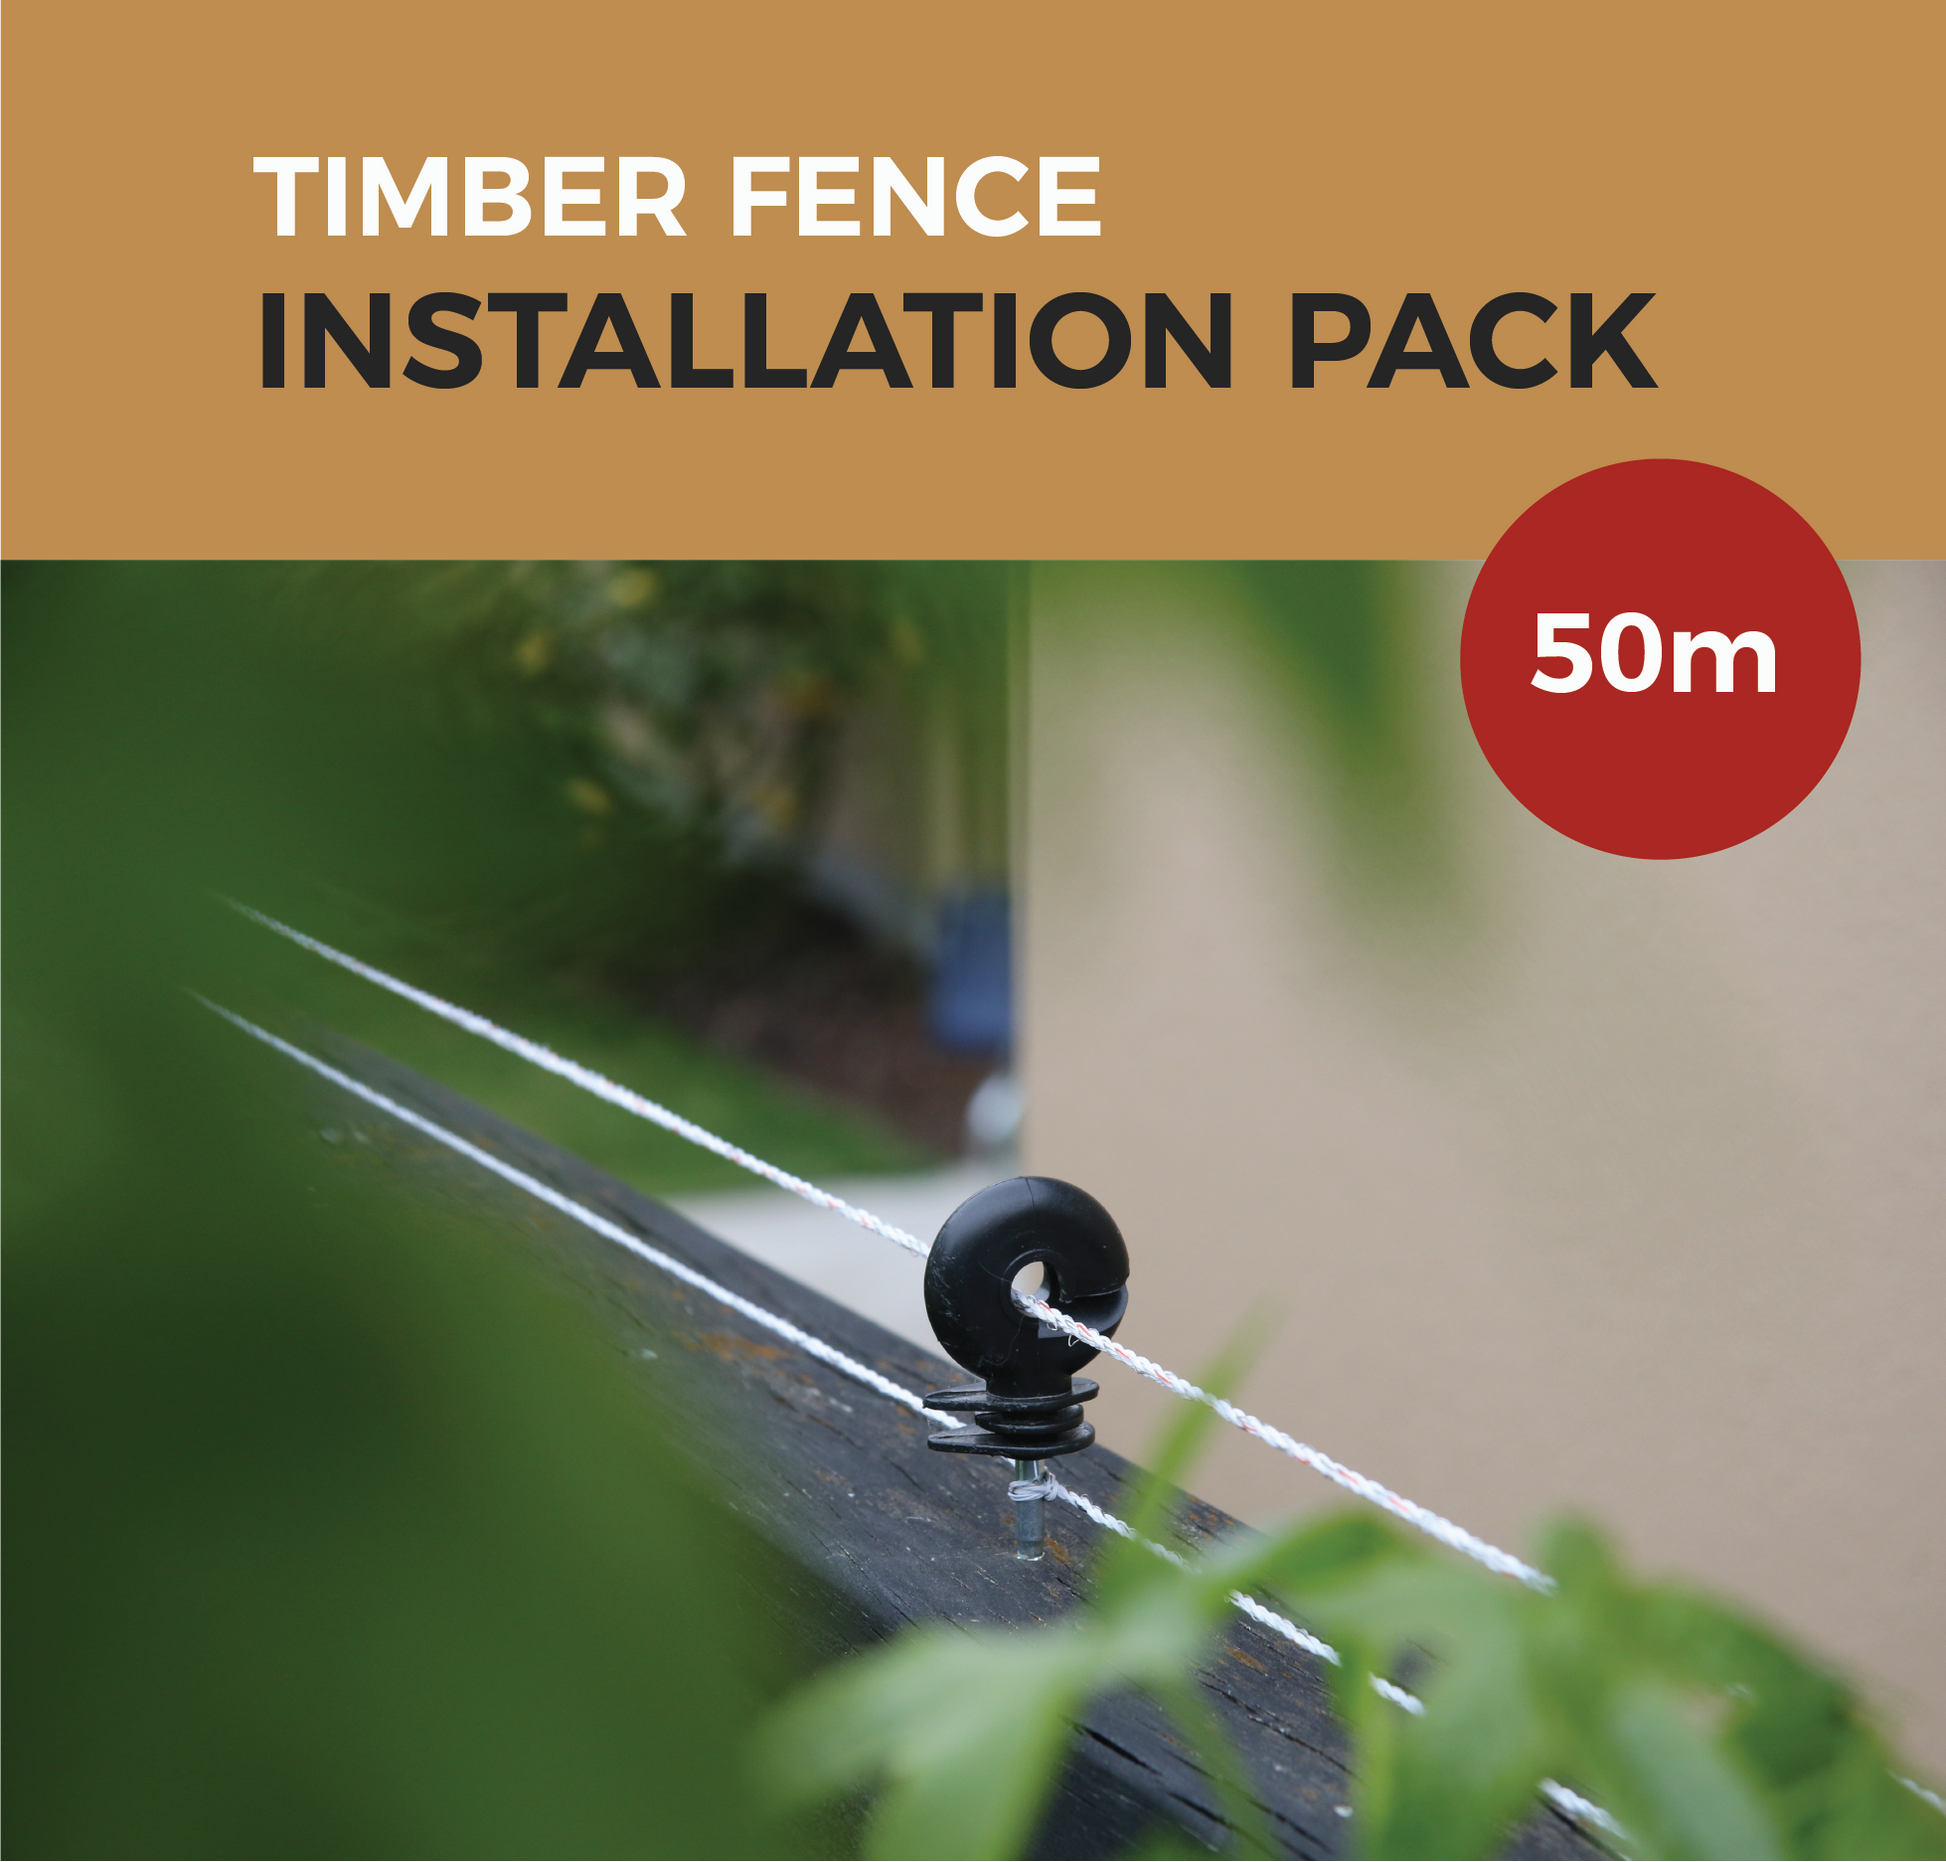 Cat Proof Fence Installation Pack - Timber Fences 50m | SmartCatsStayHome